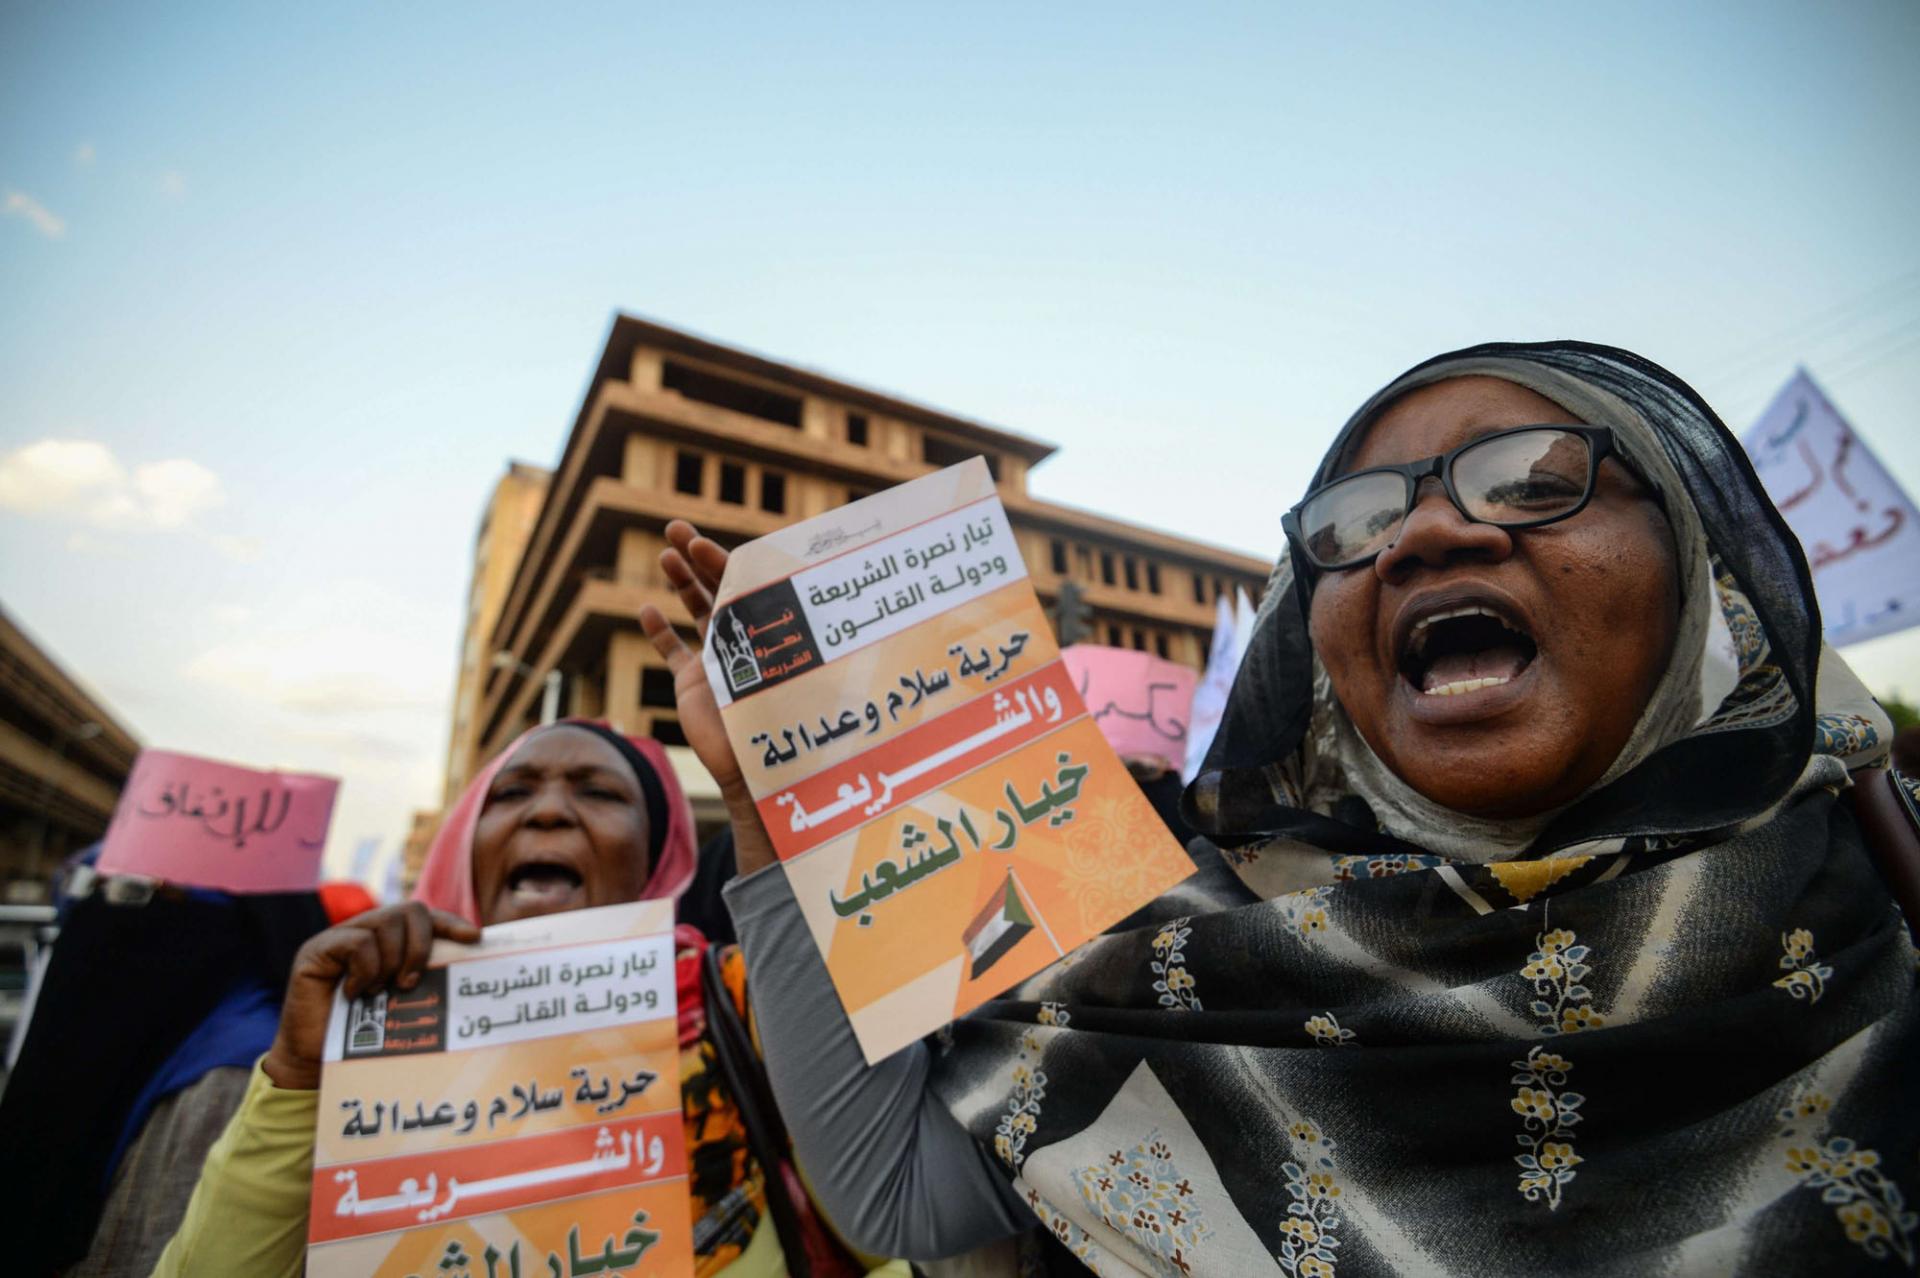 Hundreds of protesters took part in the demonstration, the first by Islamist groups since Bashir's ouster in April